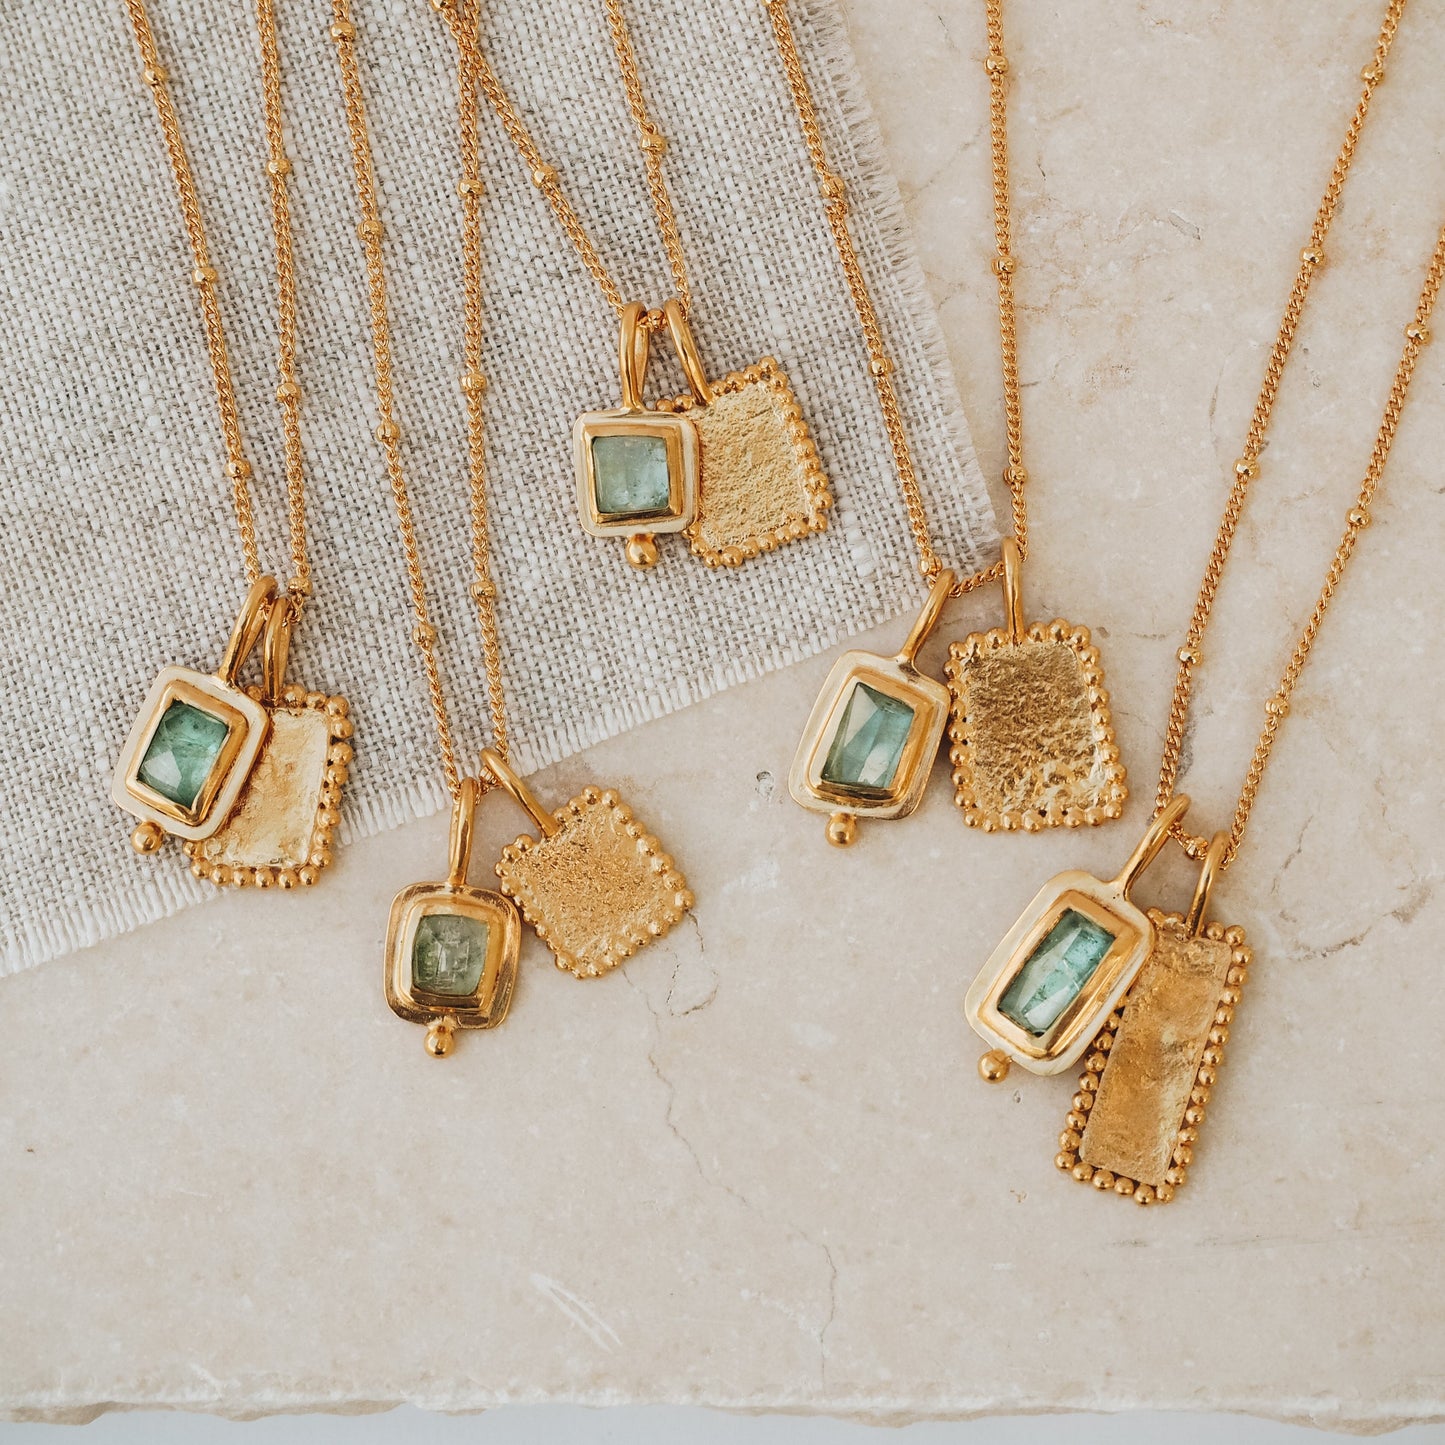 Exquisite square gold pendant featuring a captivating blue rose cut tourmaline gemstone and intricate granulation detail, gracefully suspended from a fine satellite chain.